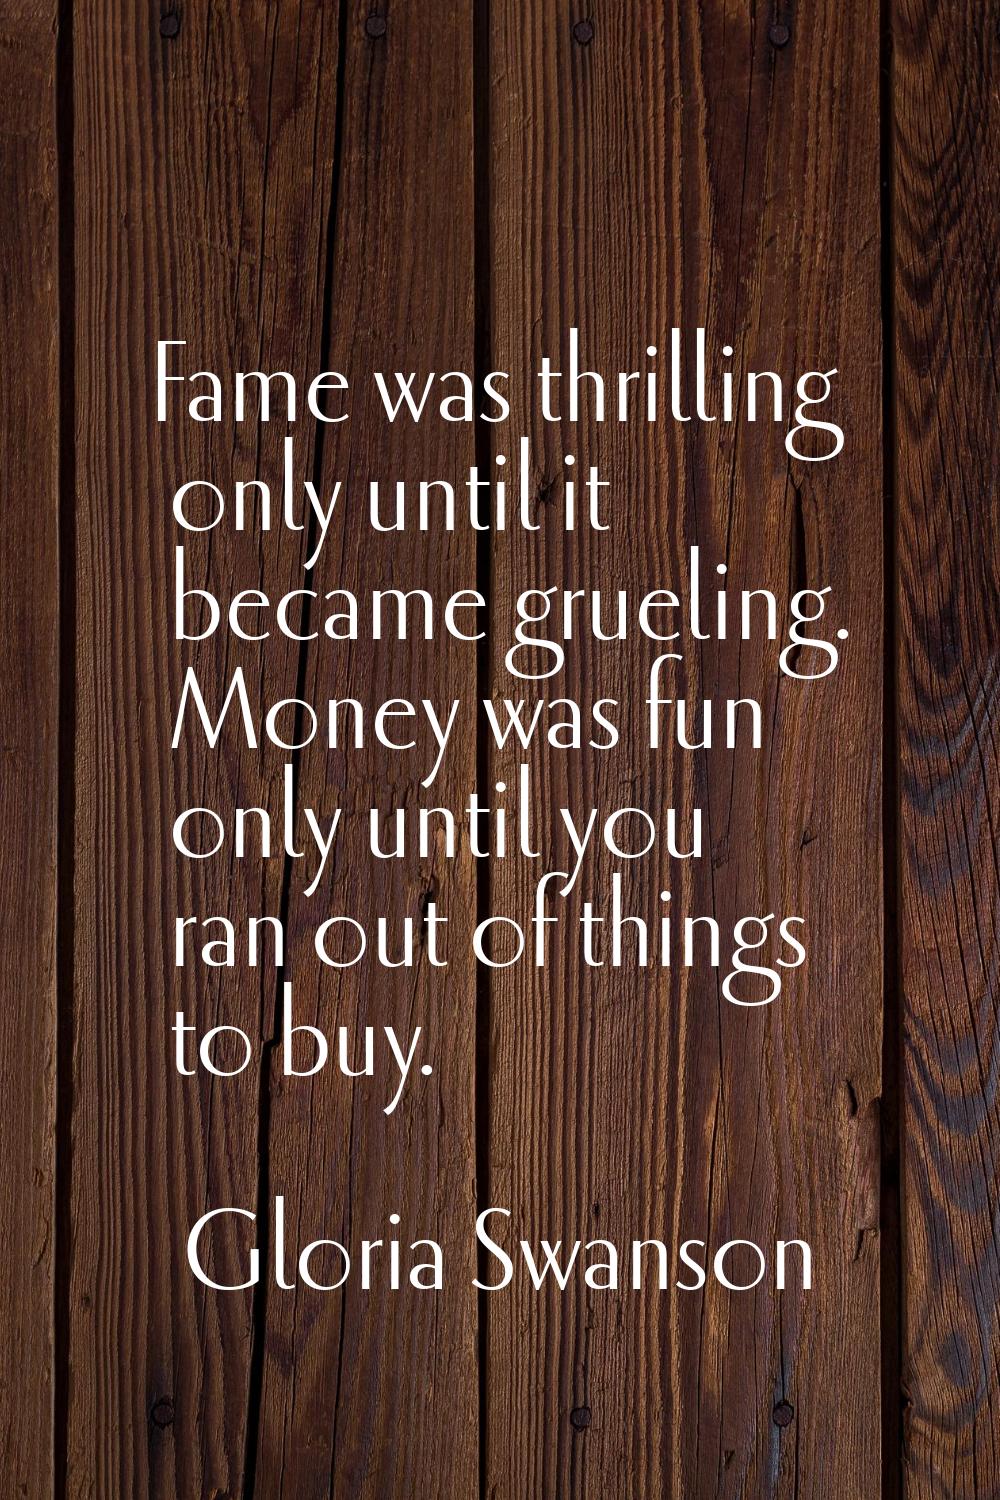 Fame was thrilling only until it became grueling. Money was fun only until you ran out of things to